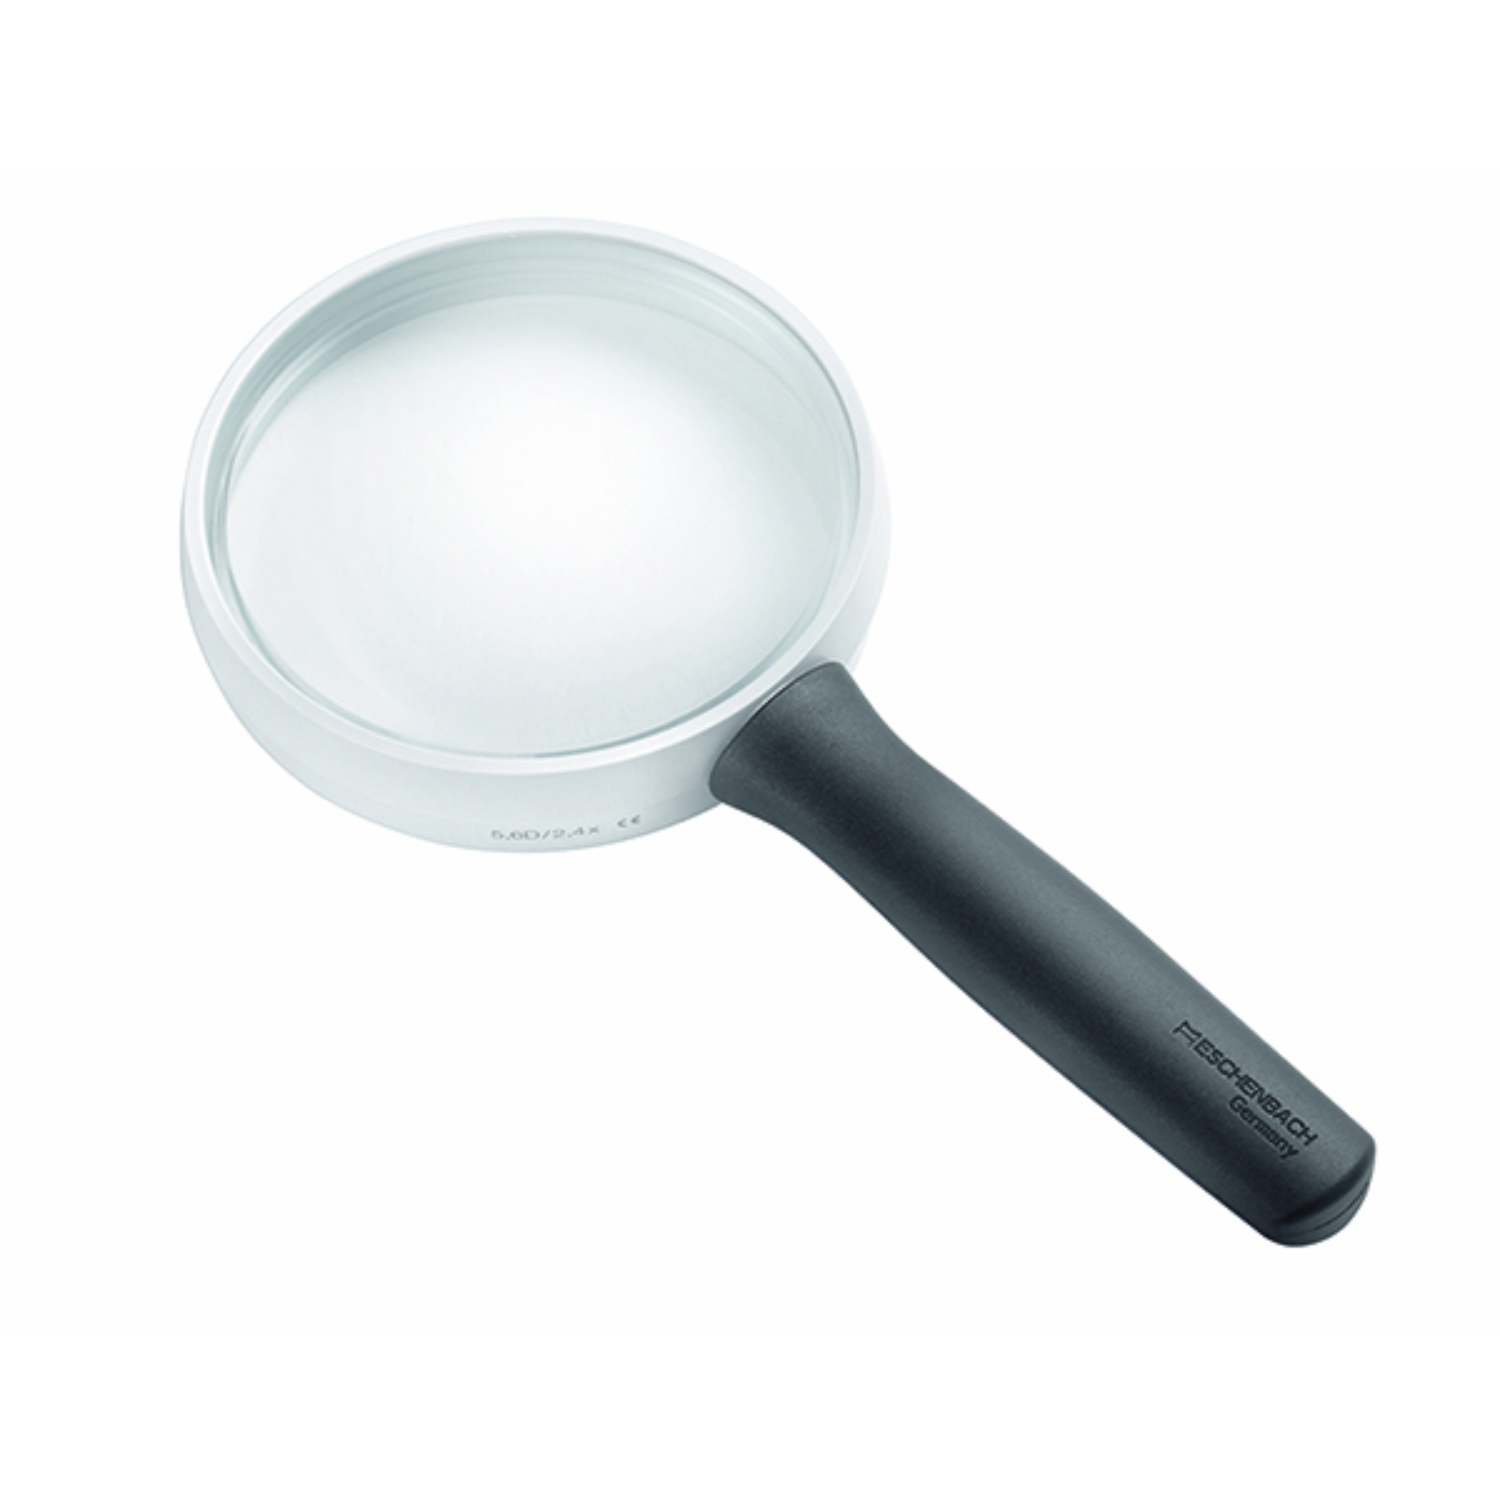 Image of the 2.4x ERGO handheld magnifying glass from Eschenbach.